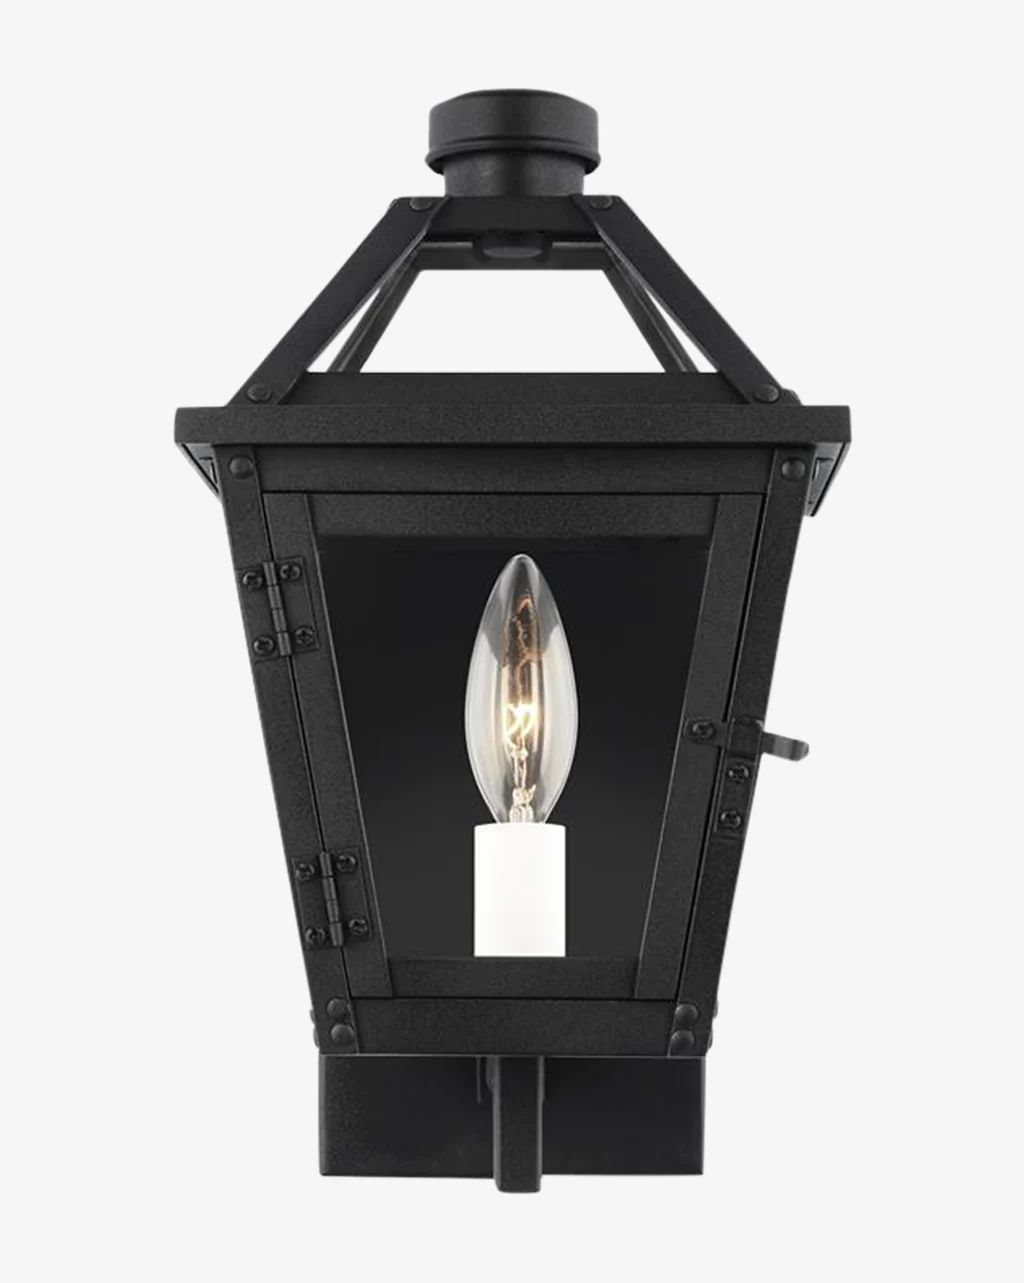 Hyannis Outdoor Wall Lantern | McGee & Co.